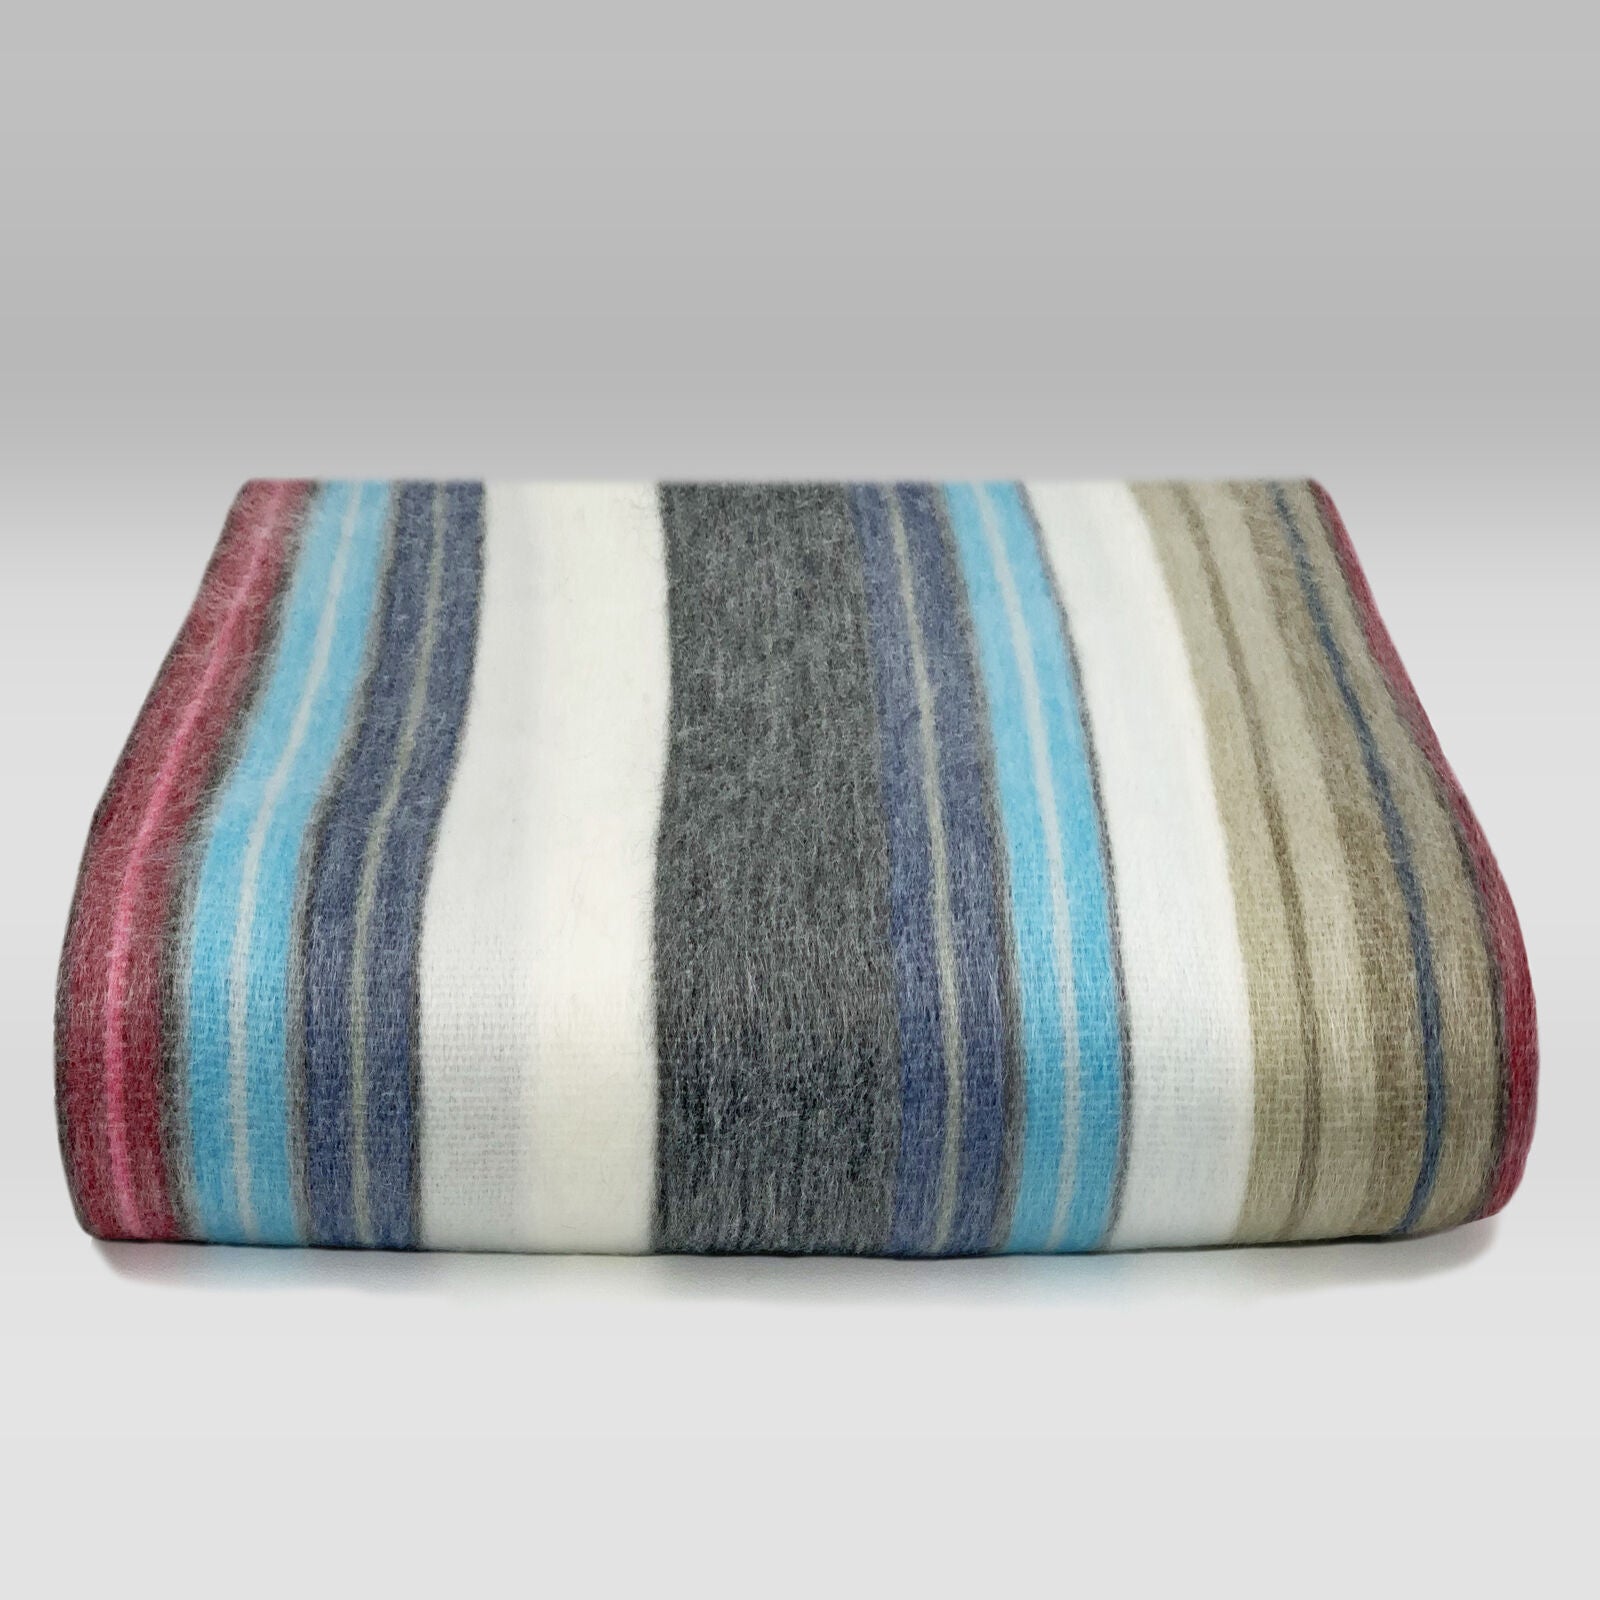 Carihuairazo - Baby Alpaca Wool Throw Blanket / Sofa Cover - Queen 90" x 63" - multi colored thin stripes pattern